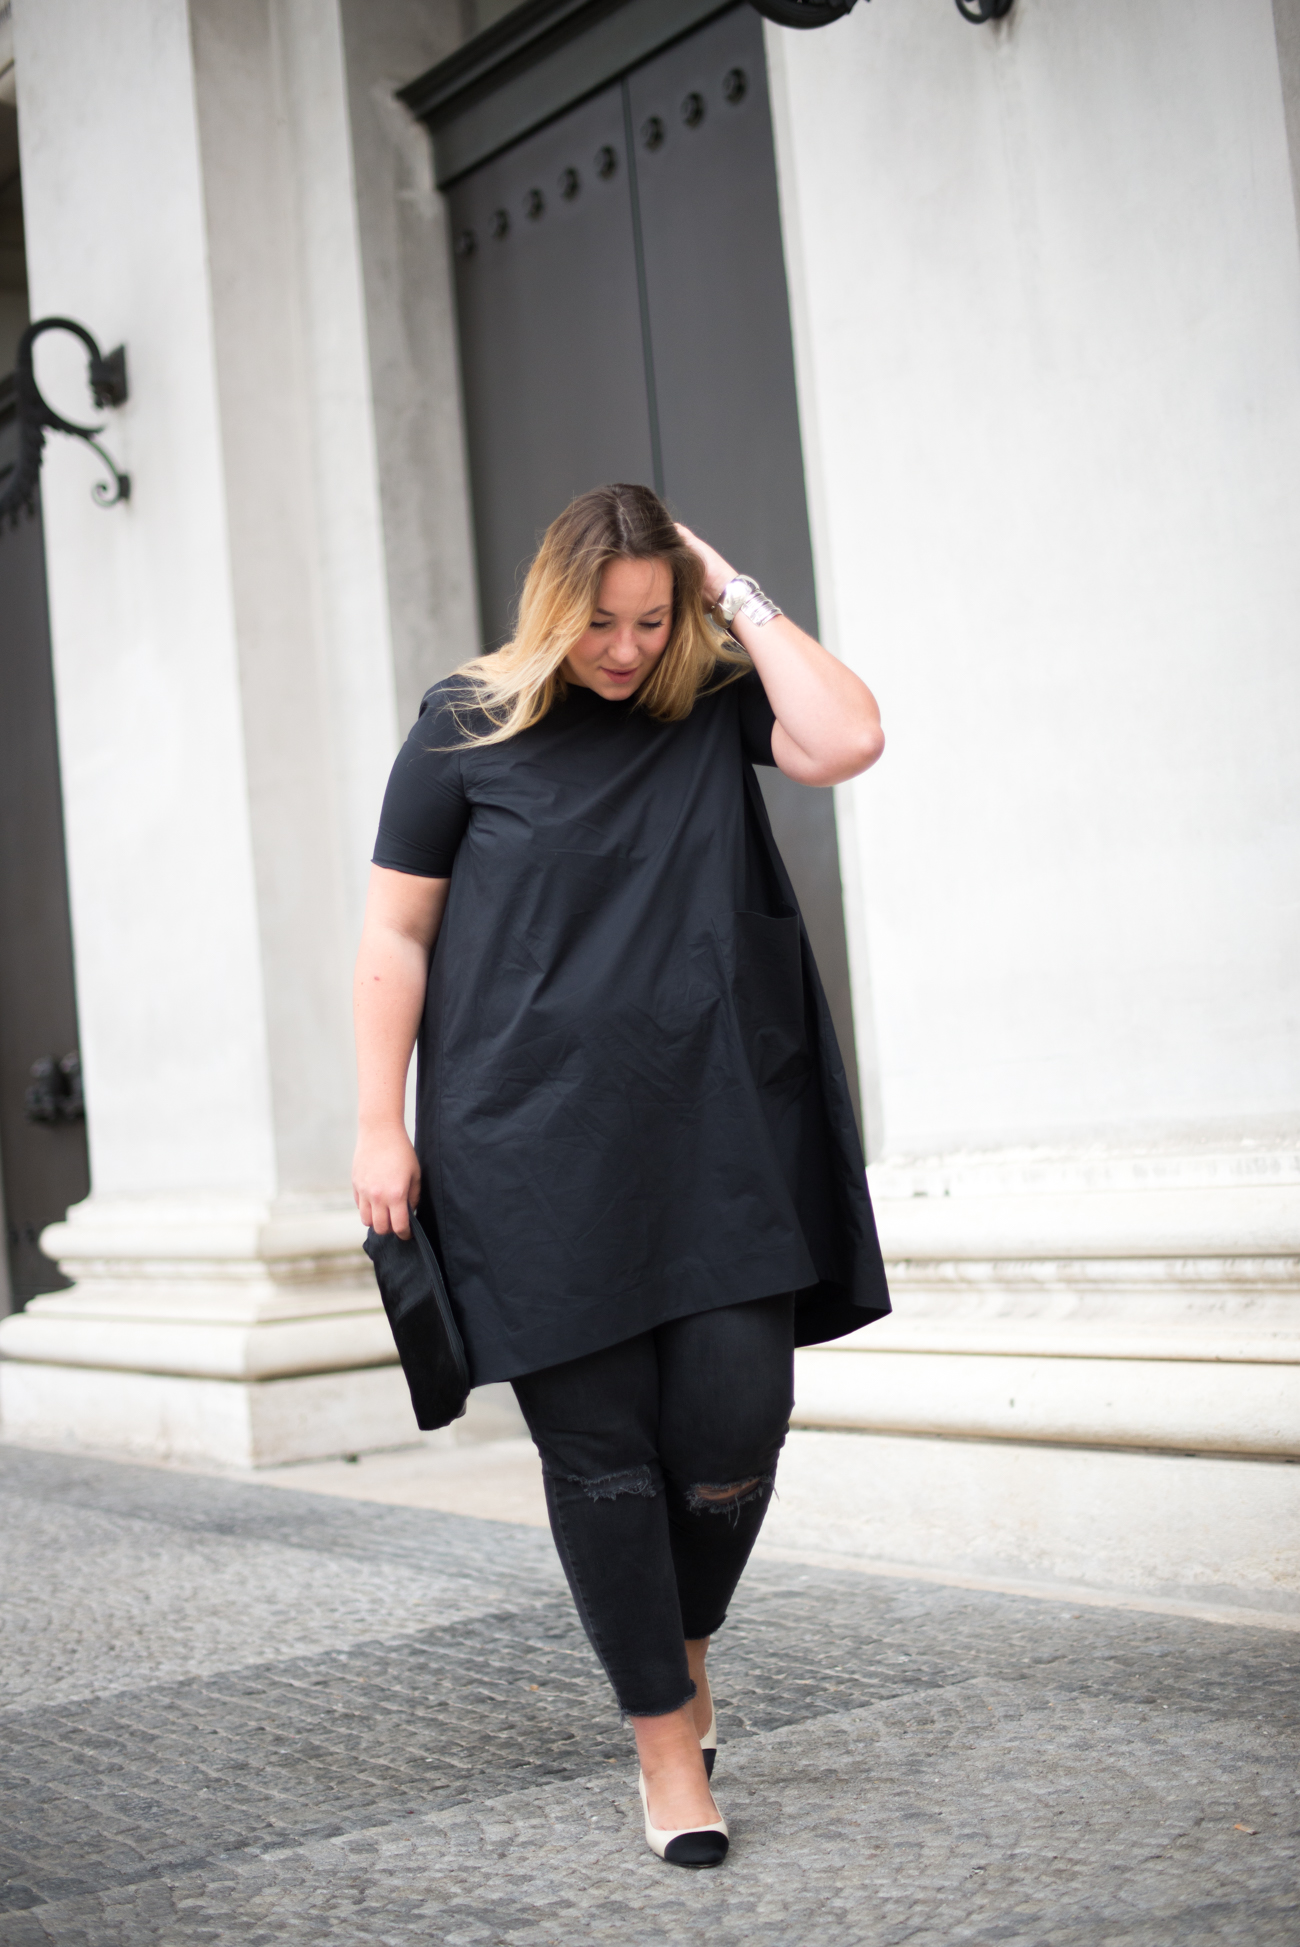 The Skinny and the Curvy One_Dress over Pants_Plussize Blogger_Plussize Fashion_Sling Back Pumps_Chanel Look a like (1 von 5)